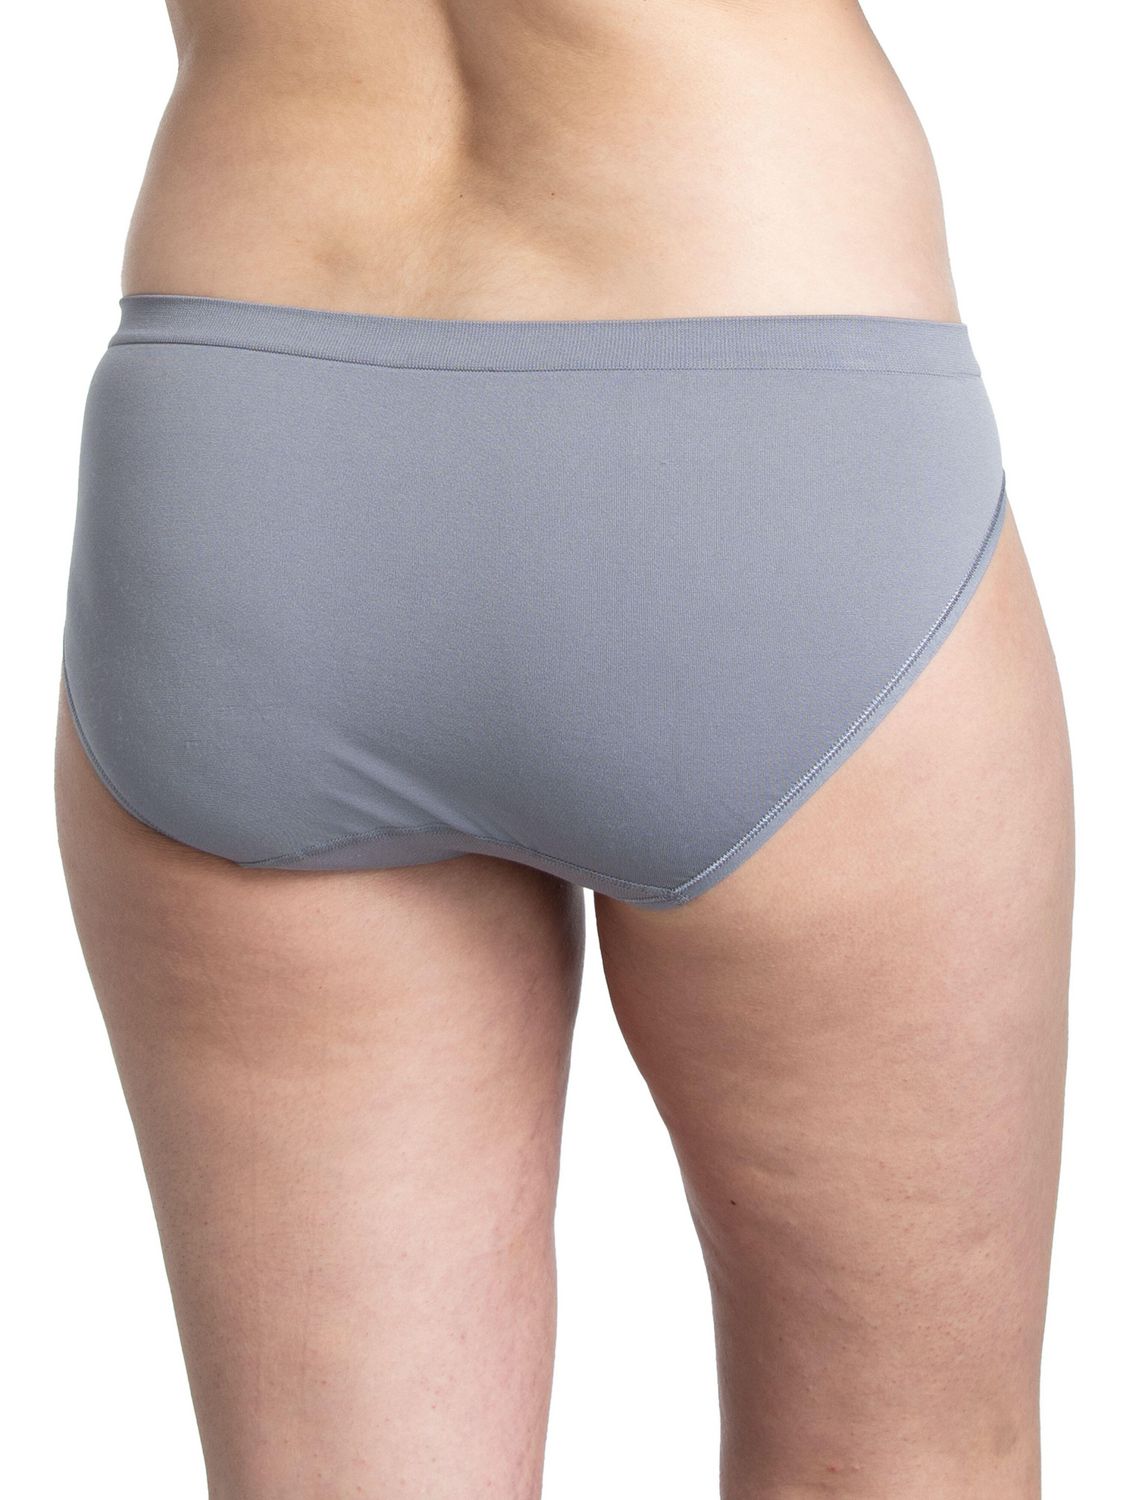  Fruit Of The Loom Womens No Show Seamless Underwear, Amazing  Stretch & No Panty Lines, Available In Plus Size, Pima Cotton Blend-Hipster-3  Pack-Mango/Nude/Blue